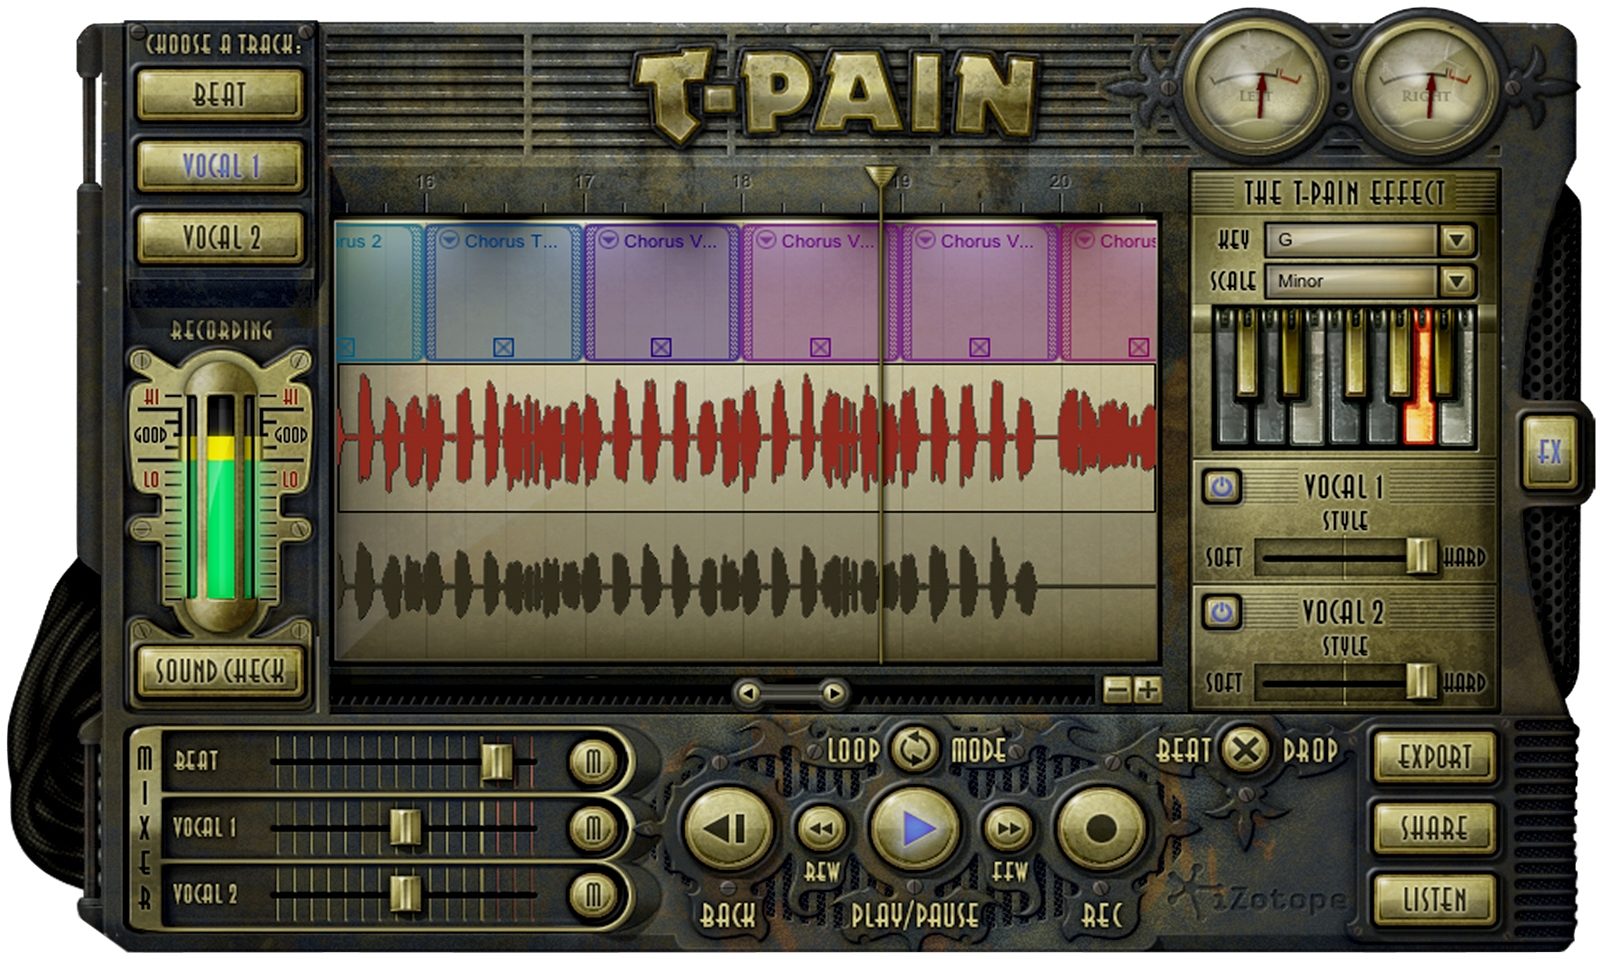 the tpain effect torrent